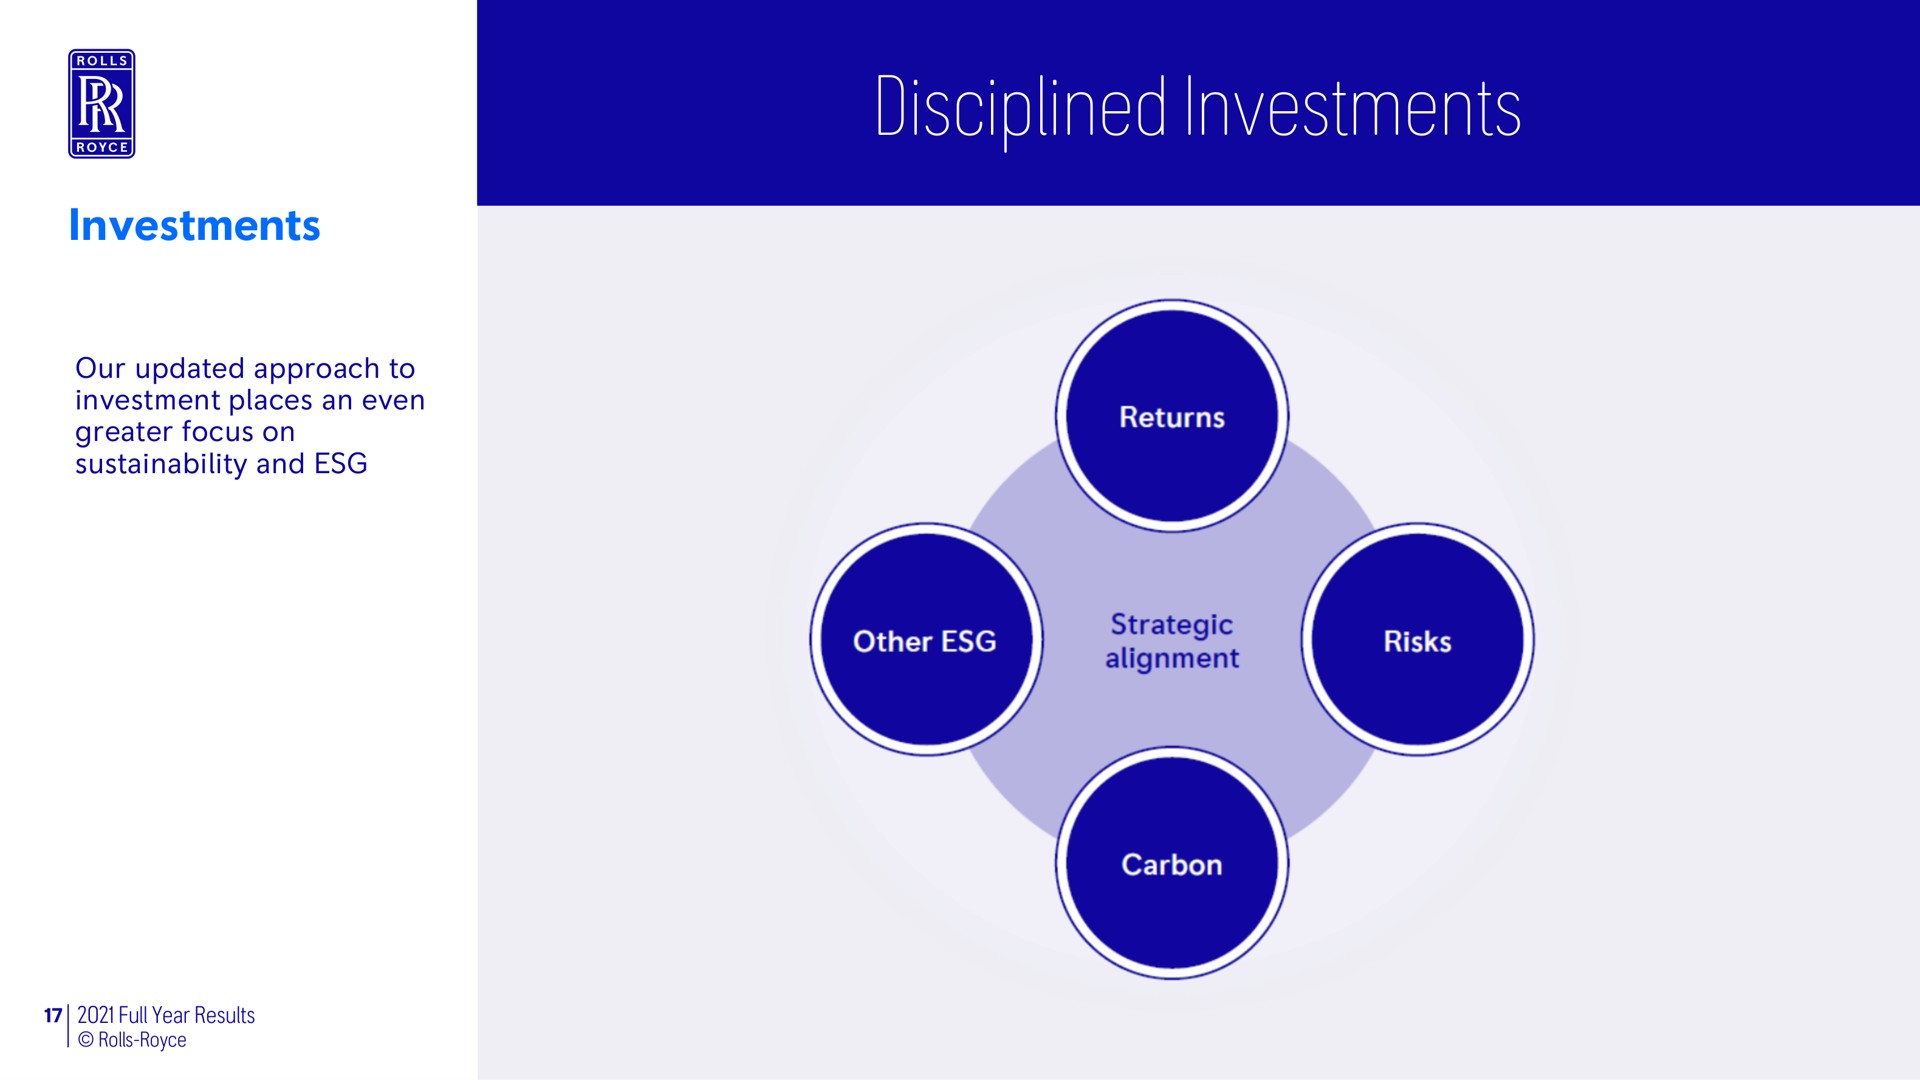 investments disciplined | Rolls-Royce Holdings